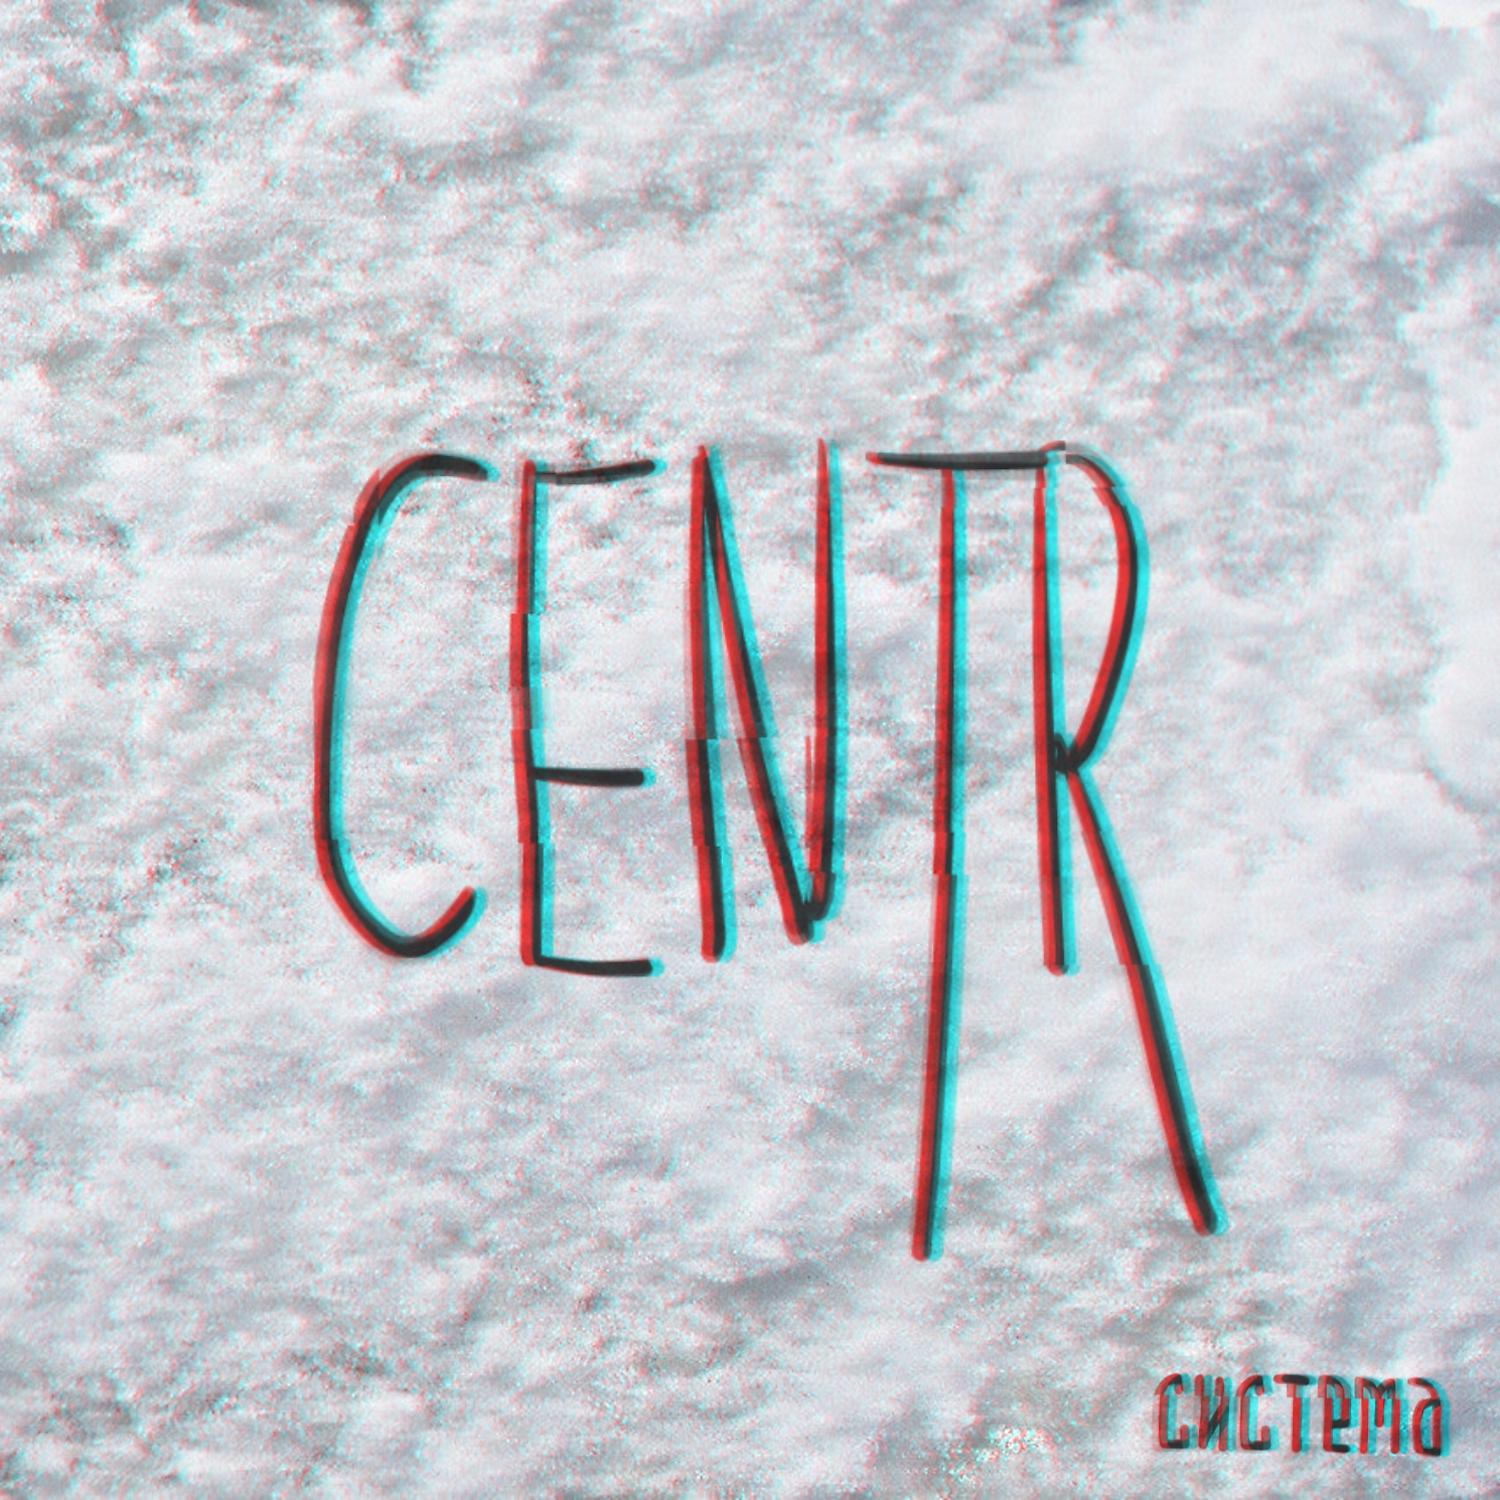 CENTR - Аватар (feat. Каспийский Груз)